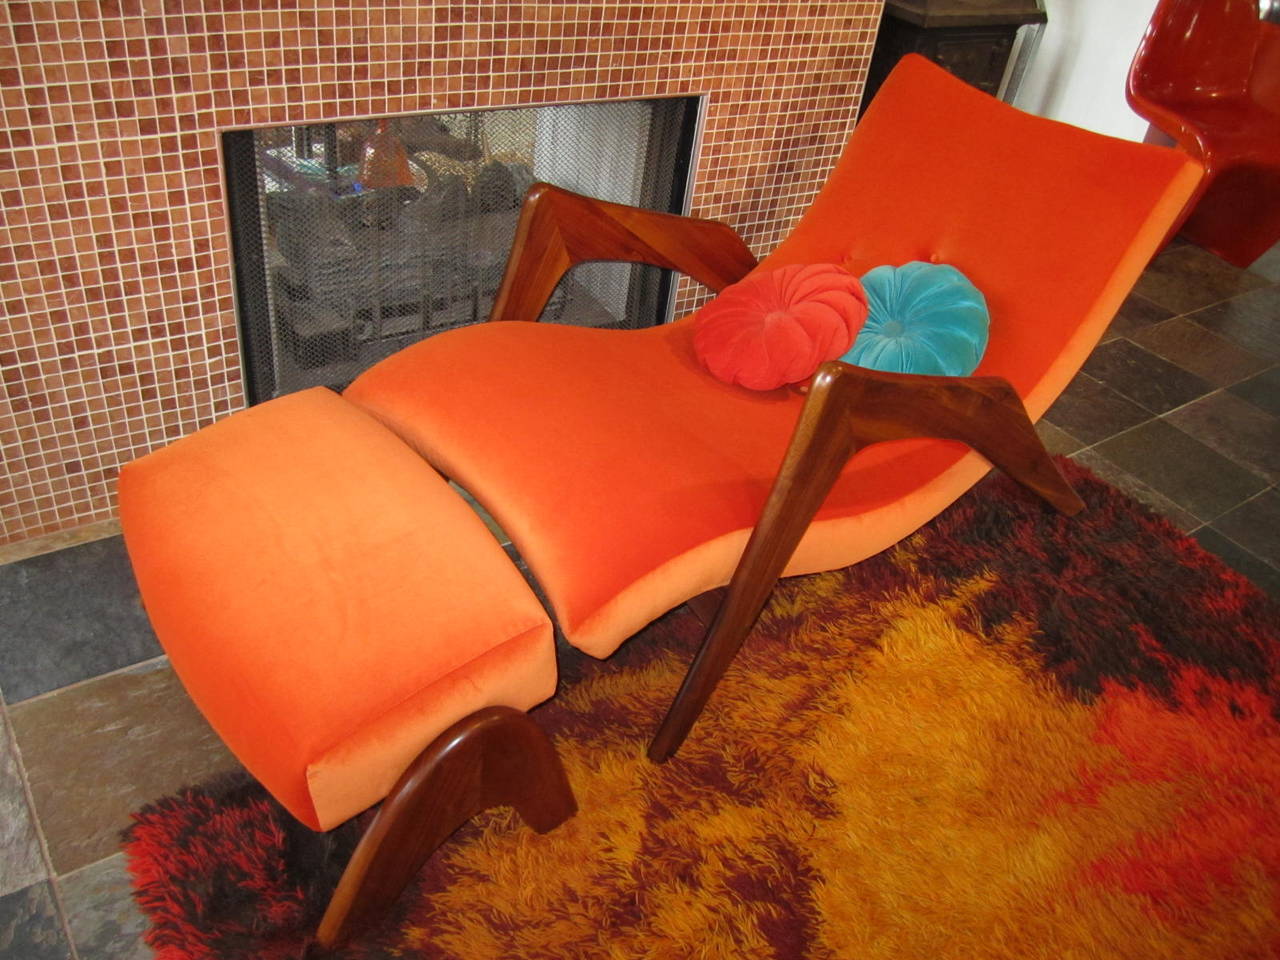 Rare and hard to find lounge chair and ottoman designed by Adrian Pearsall, sometimes call the grasshopper chair. Refinished and reupholstered in a high end citrus orange velvet. The new orange velvet fabric has a slight ombre effect-shading darker